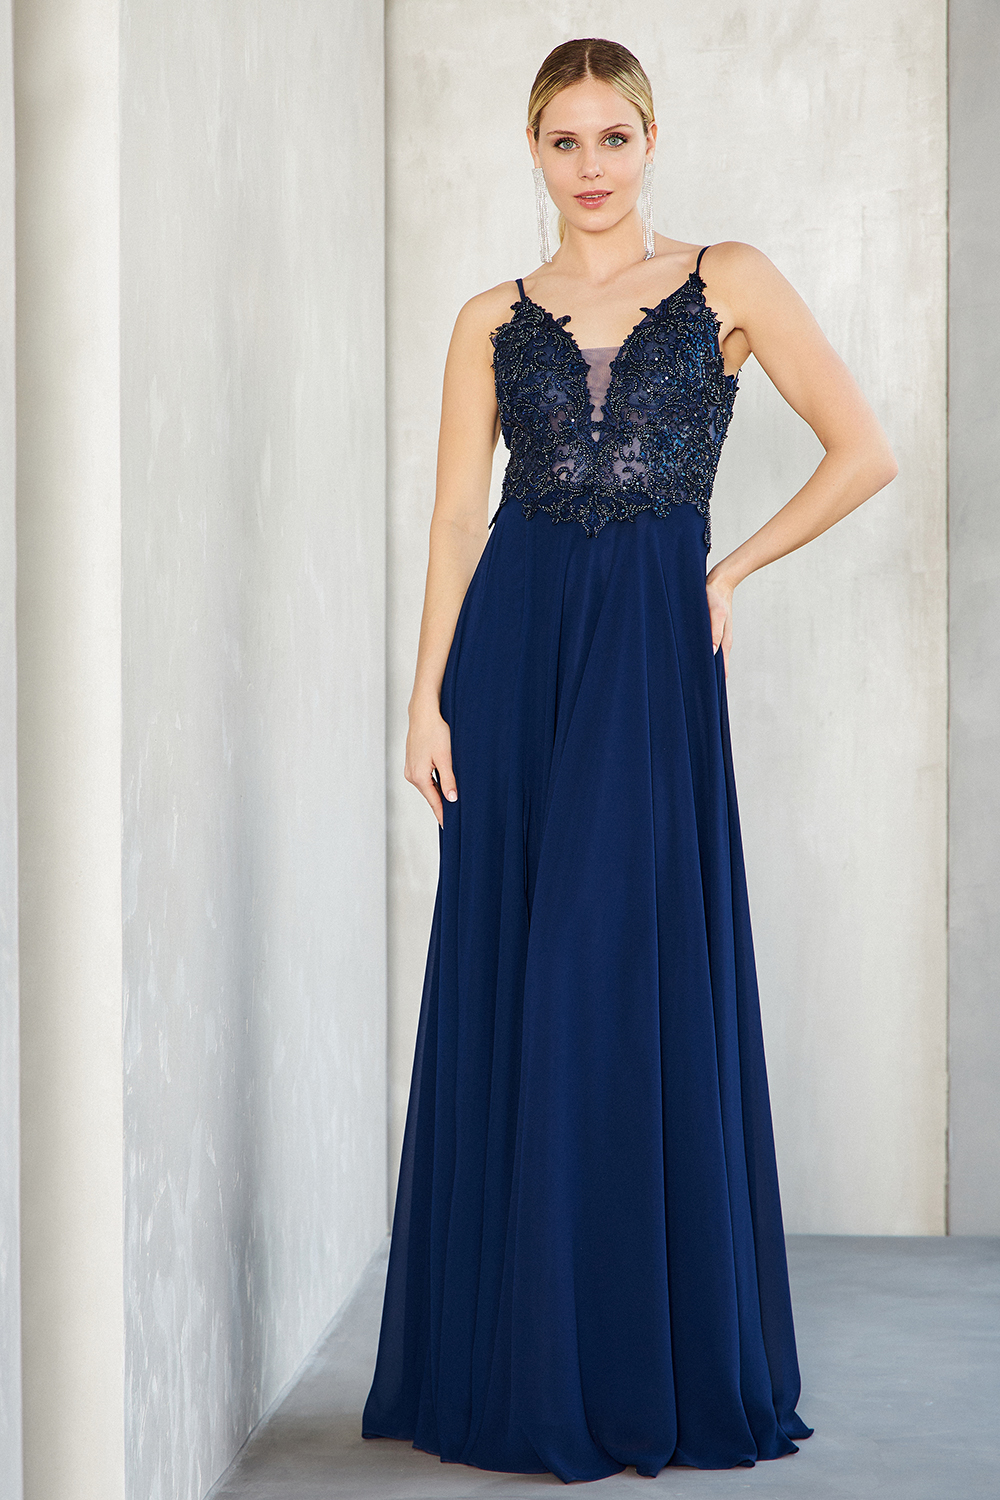 Long evening chiffon dress with beaded top, straps and open back